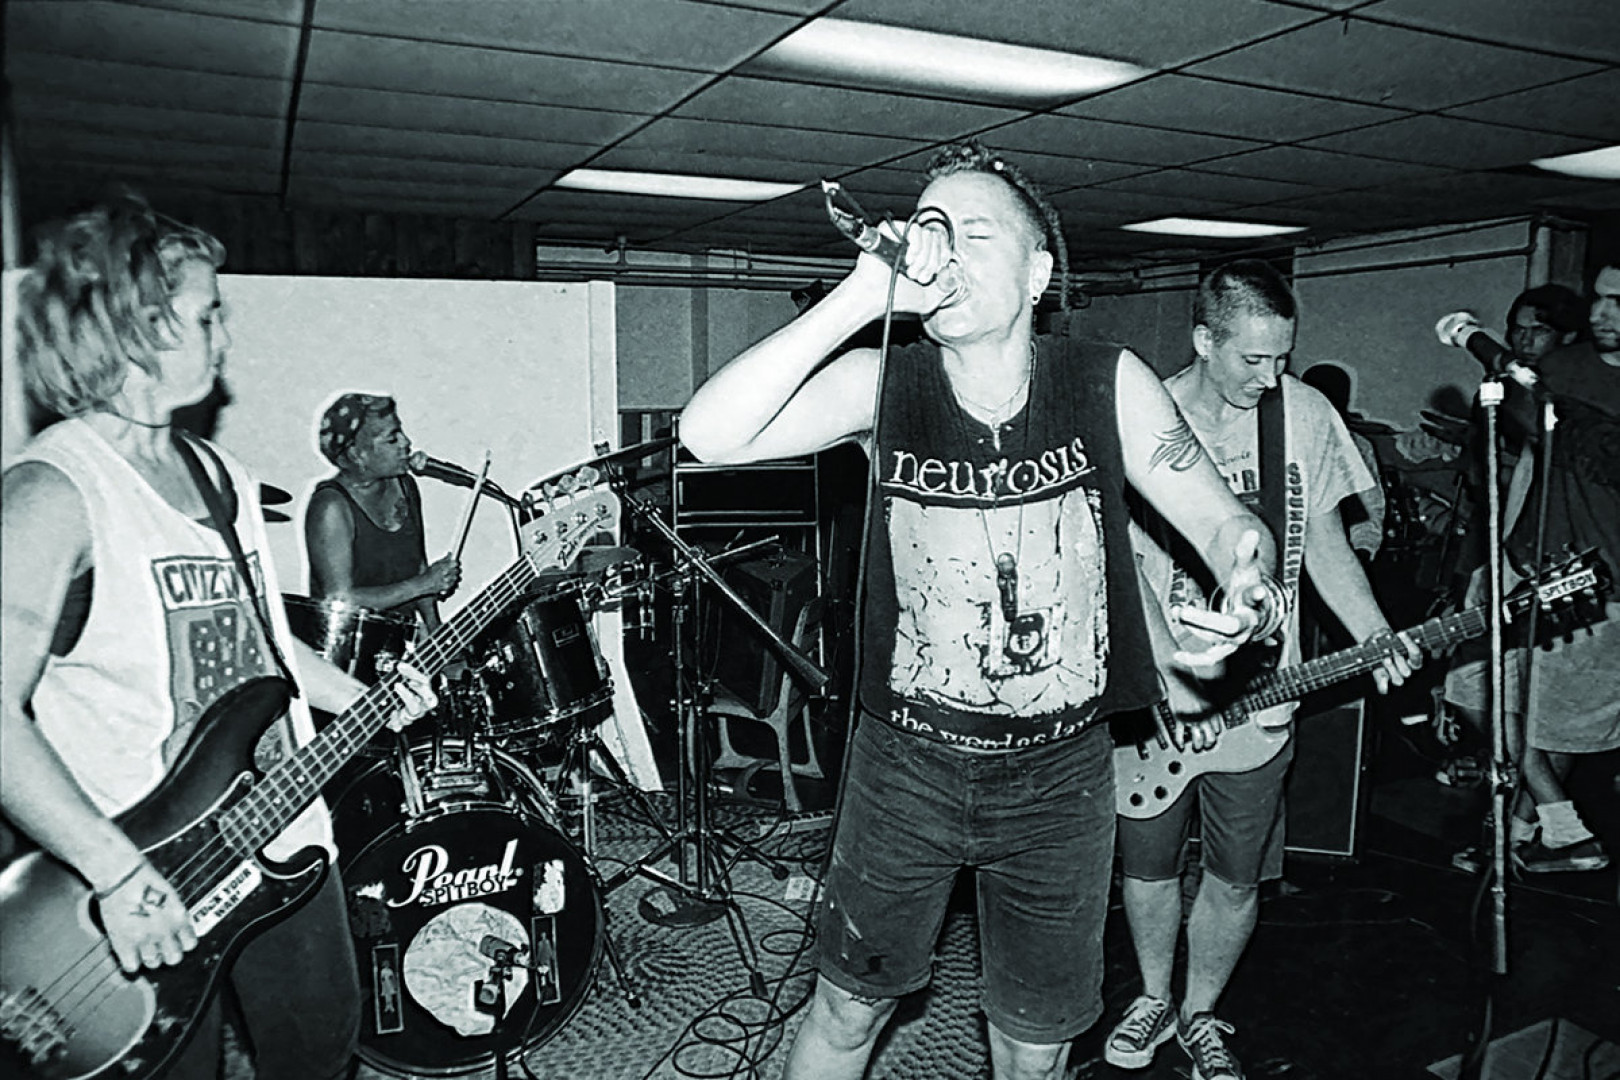 Spitboy to release discography compilation